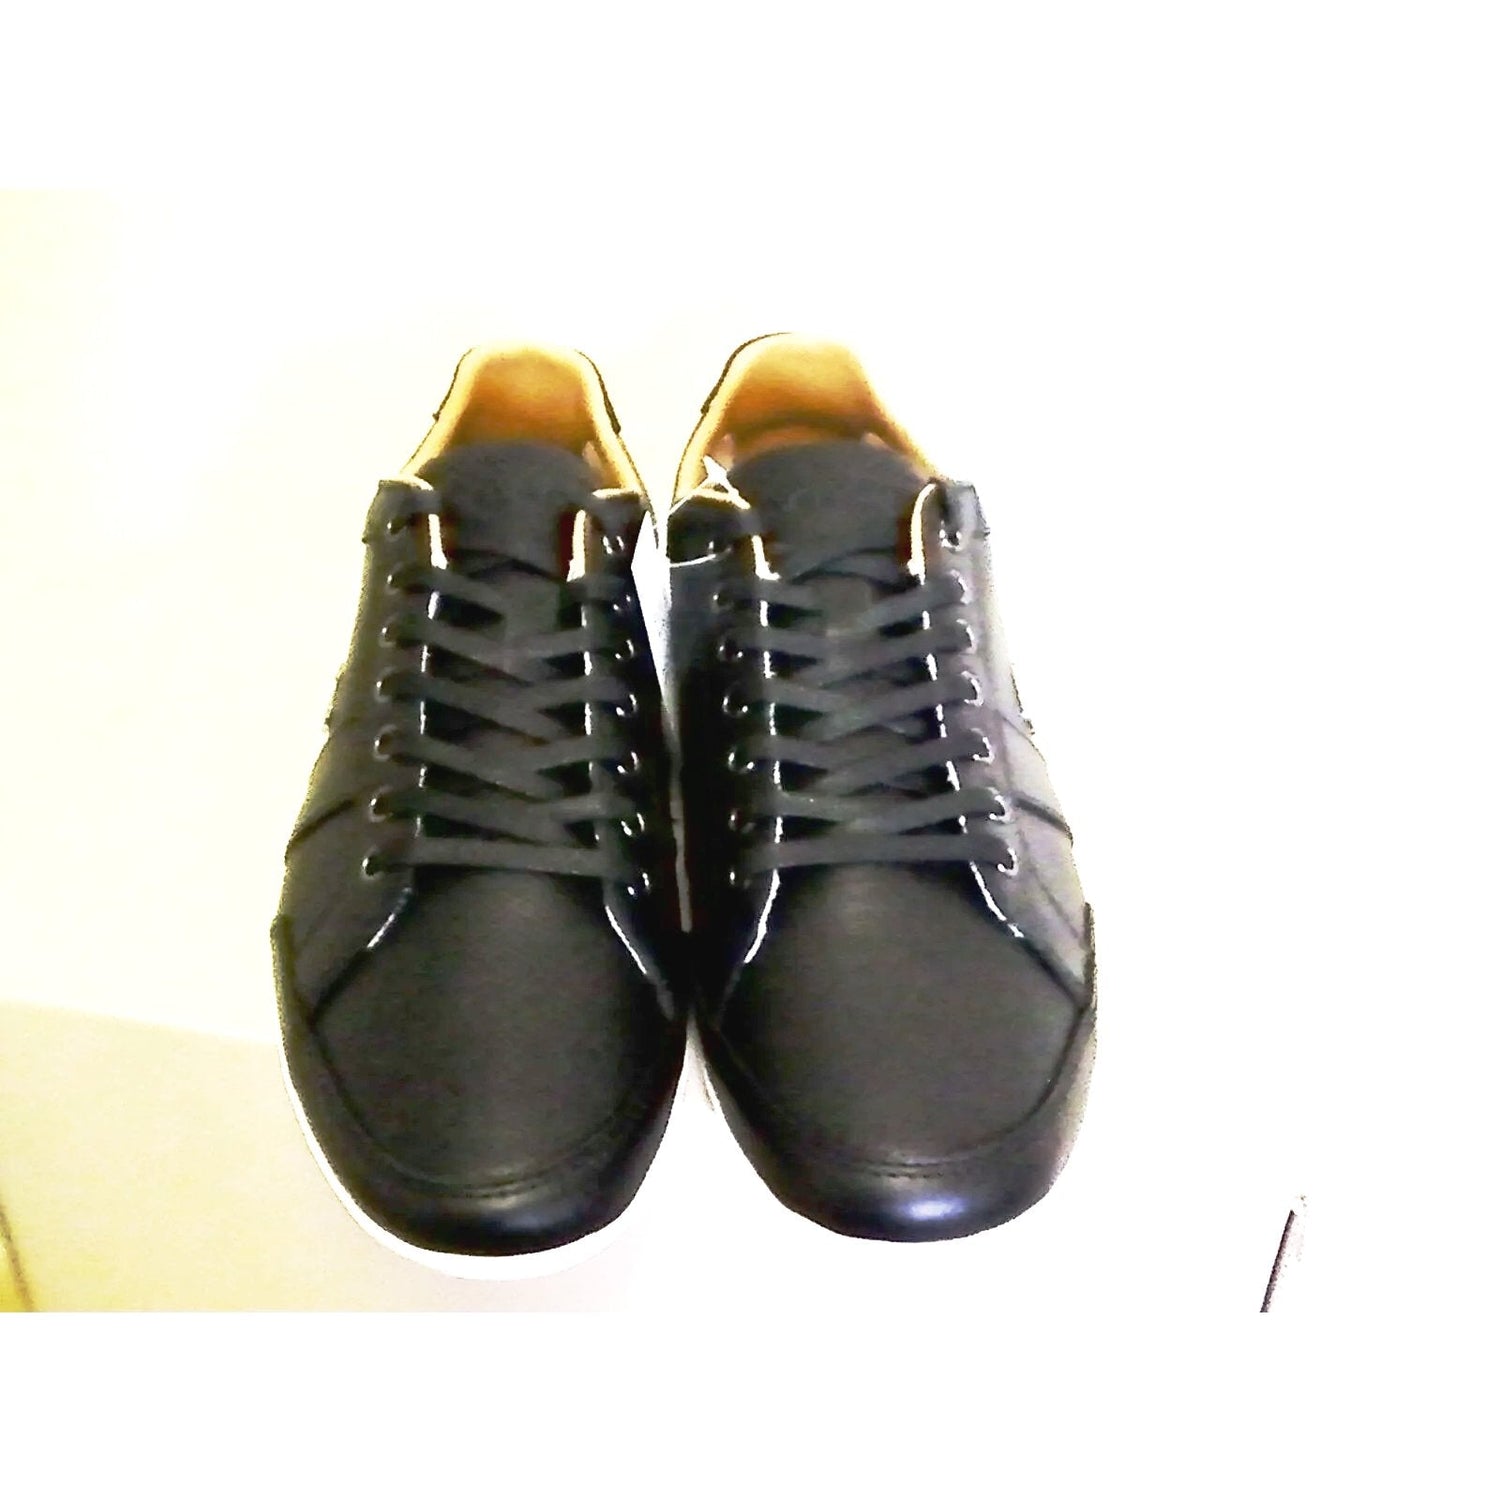 Lacoste casual shoes alisos 16 spm black leather size 8.5 us new with box - Classic Fashion Deals